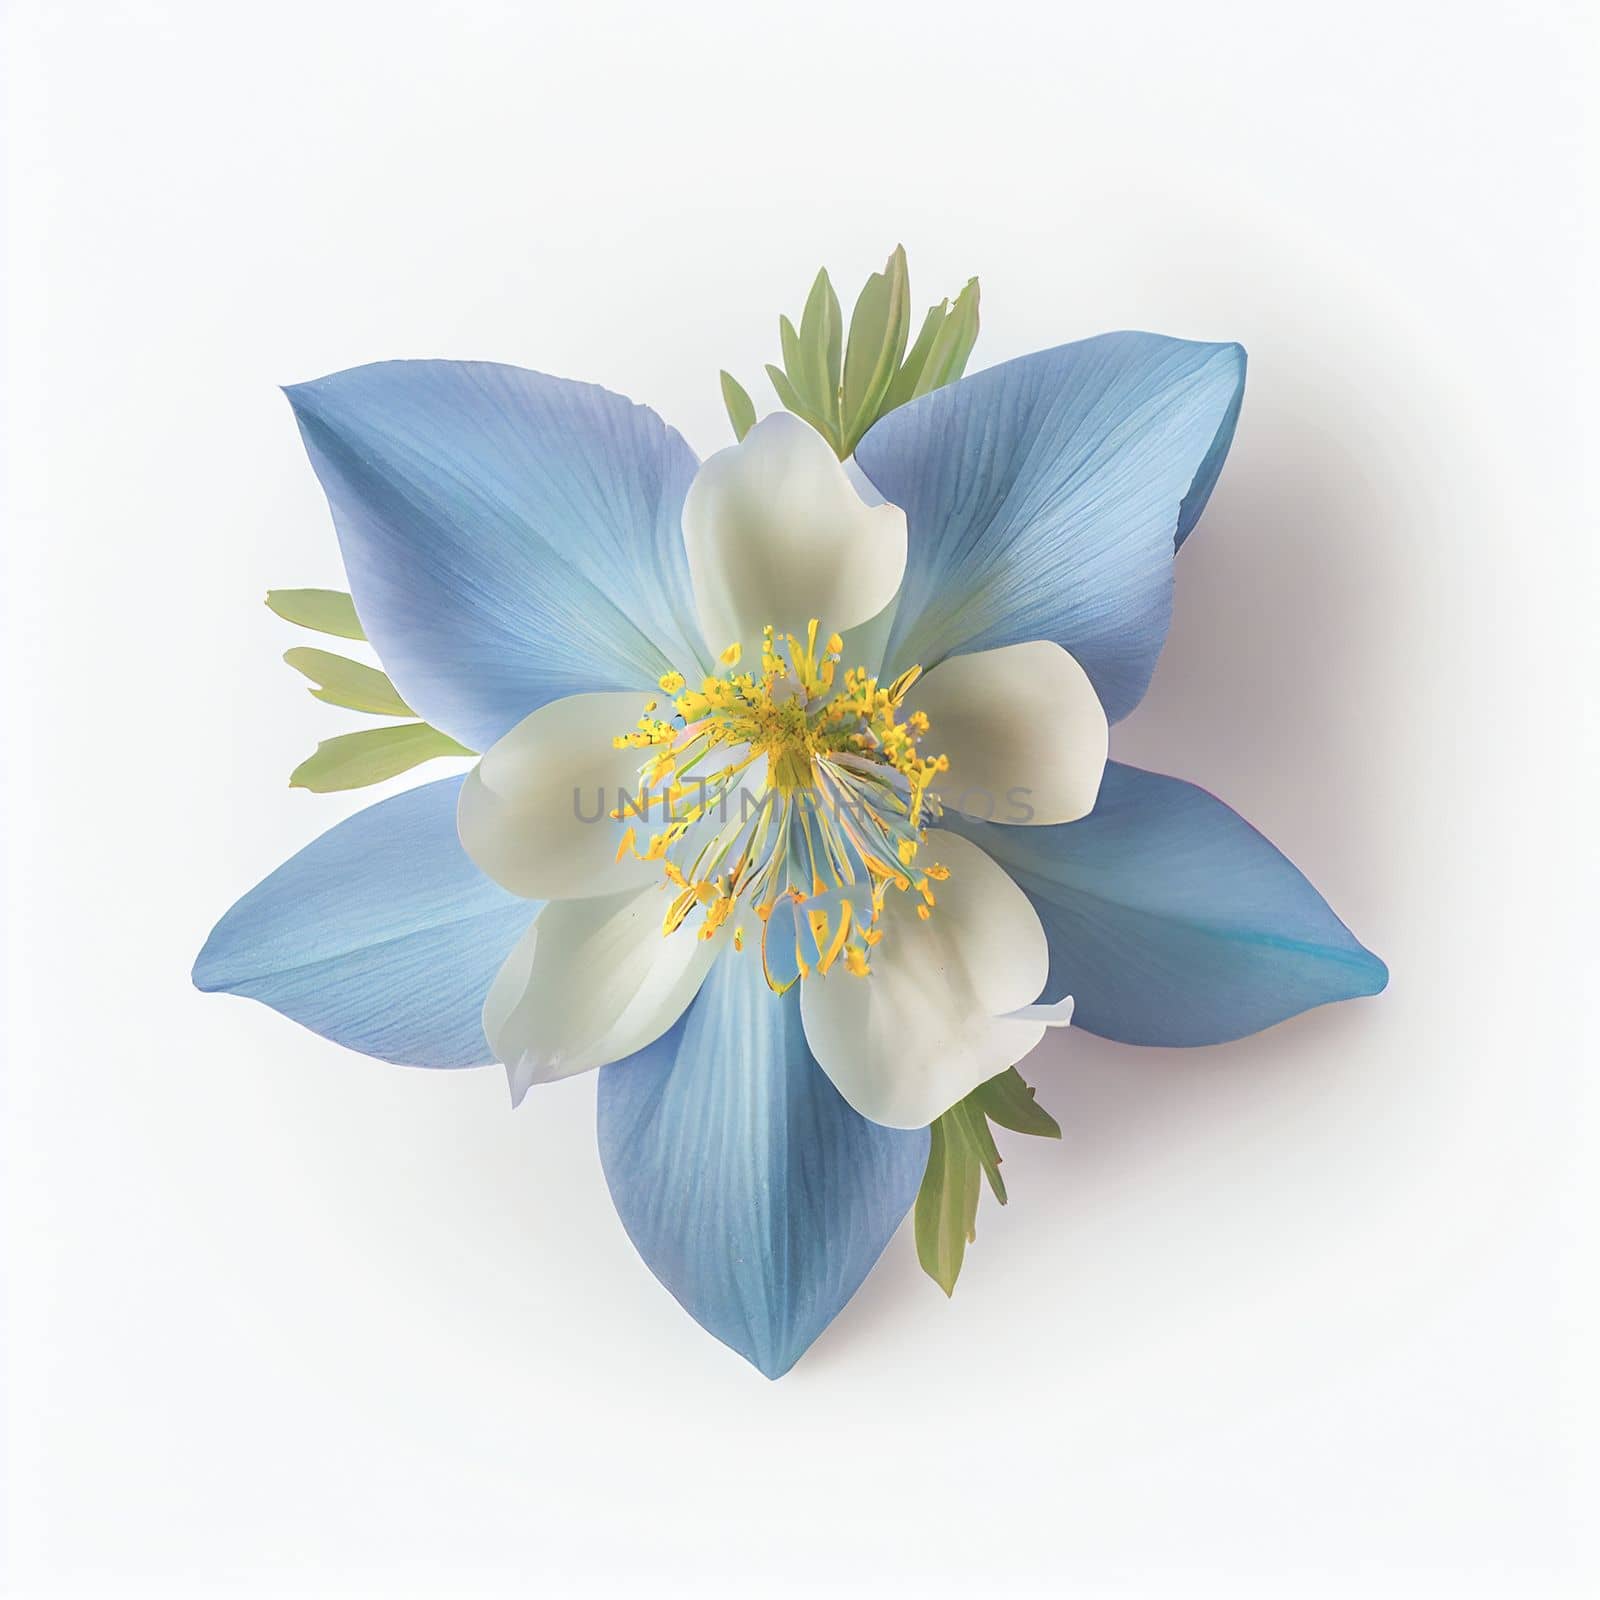 Top view a Colorado blue columbine flower isolated on a white background, suitable for use on Valentine's Day cards, love letters, or springtime designs.